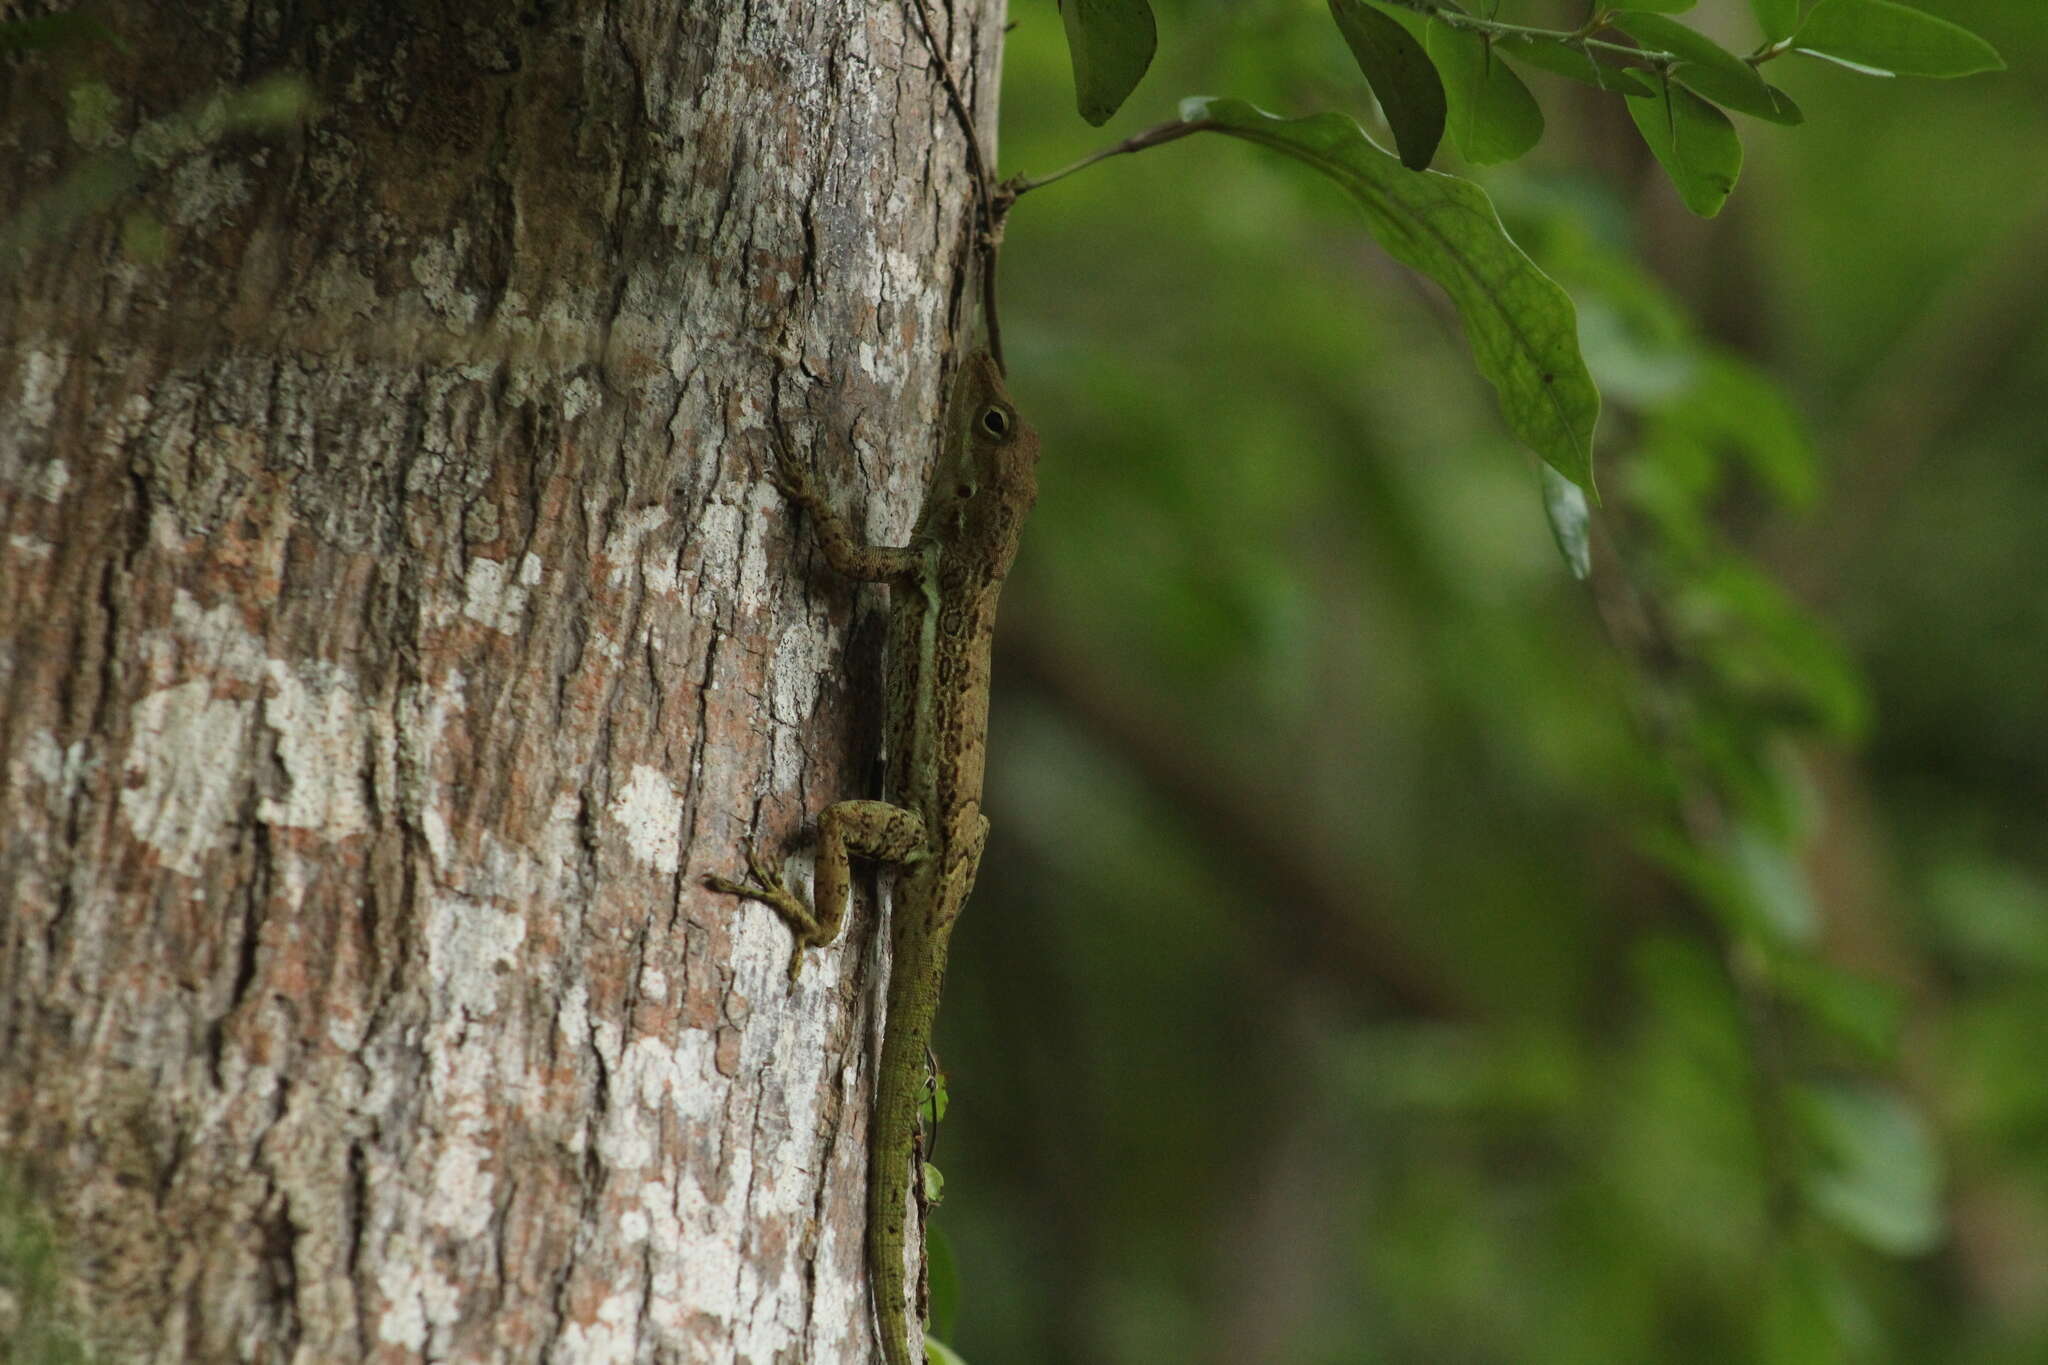 Image of Anguilla Bank Anole